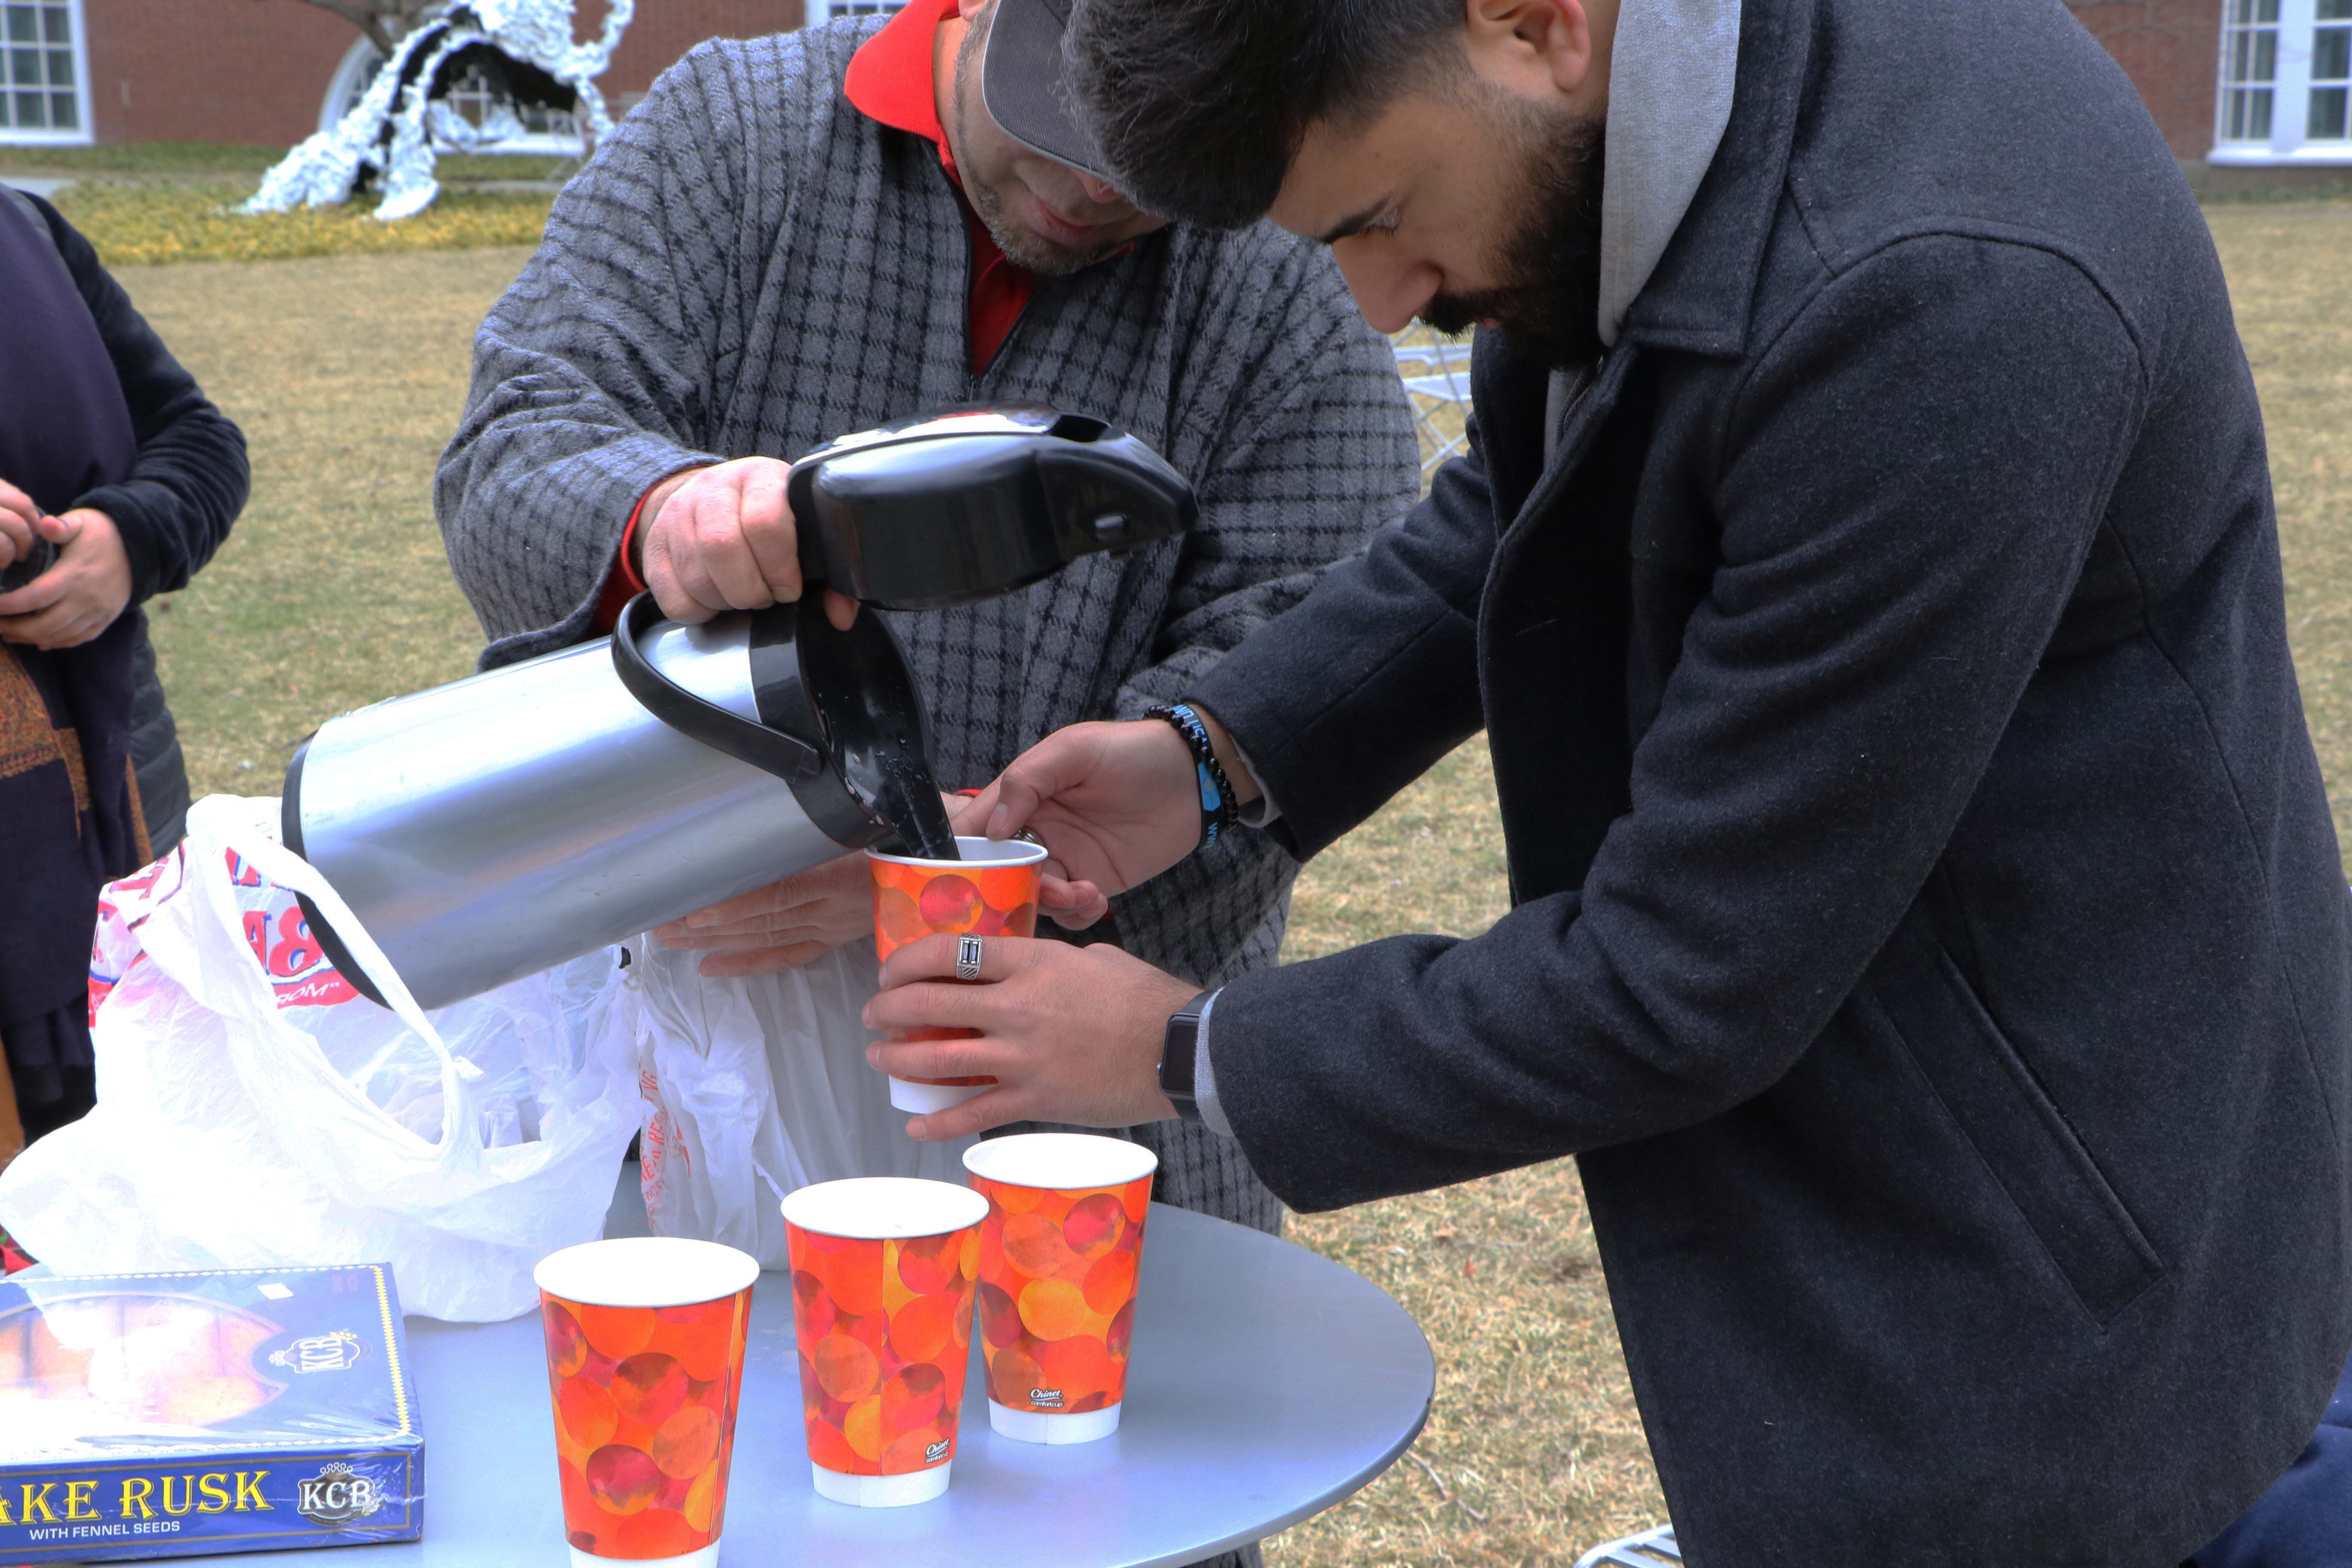 A man pours in tea into paper cups.